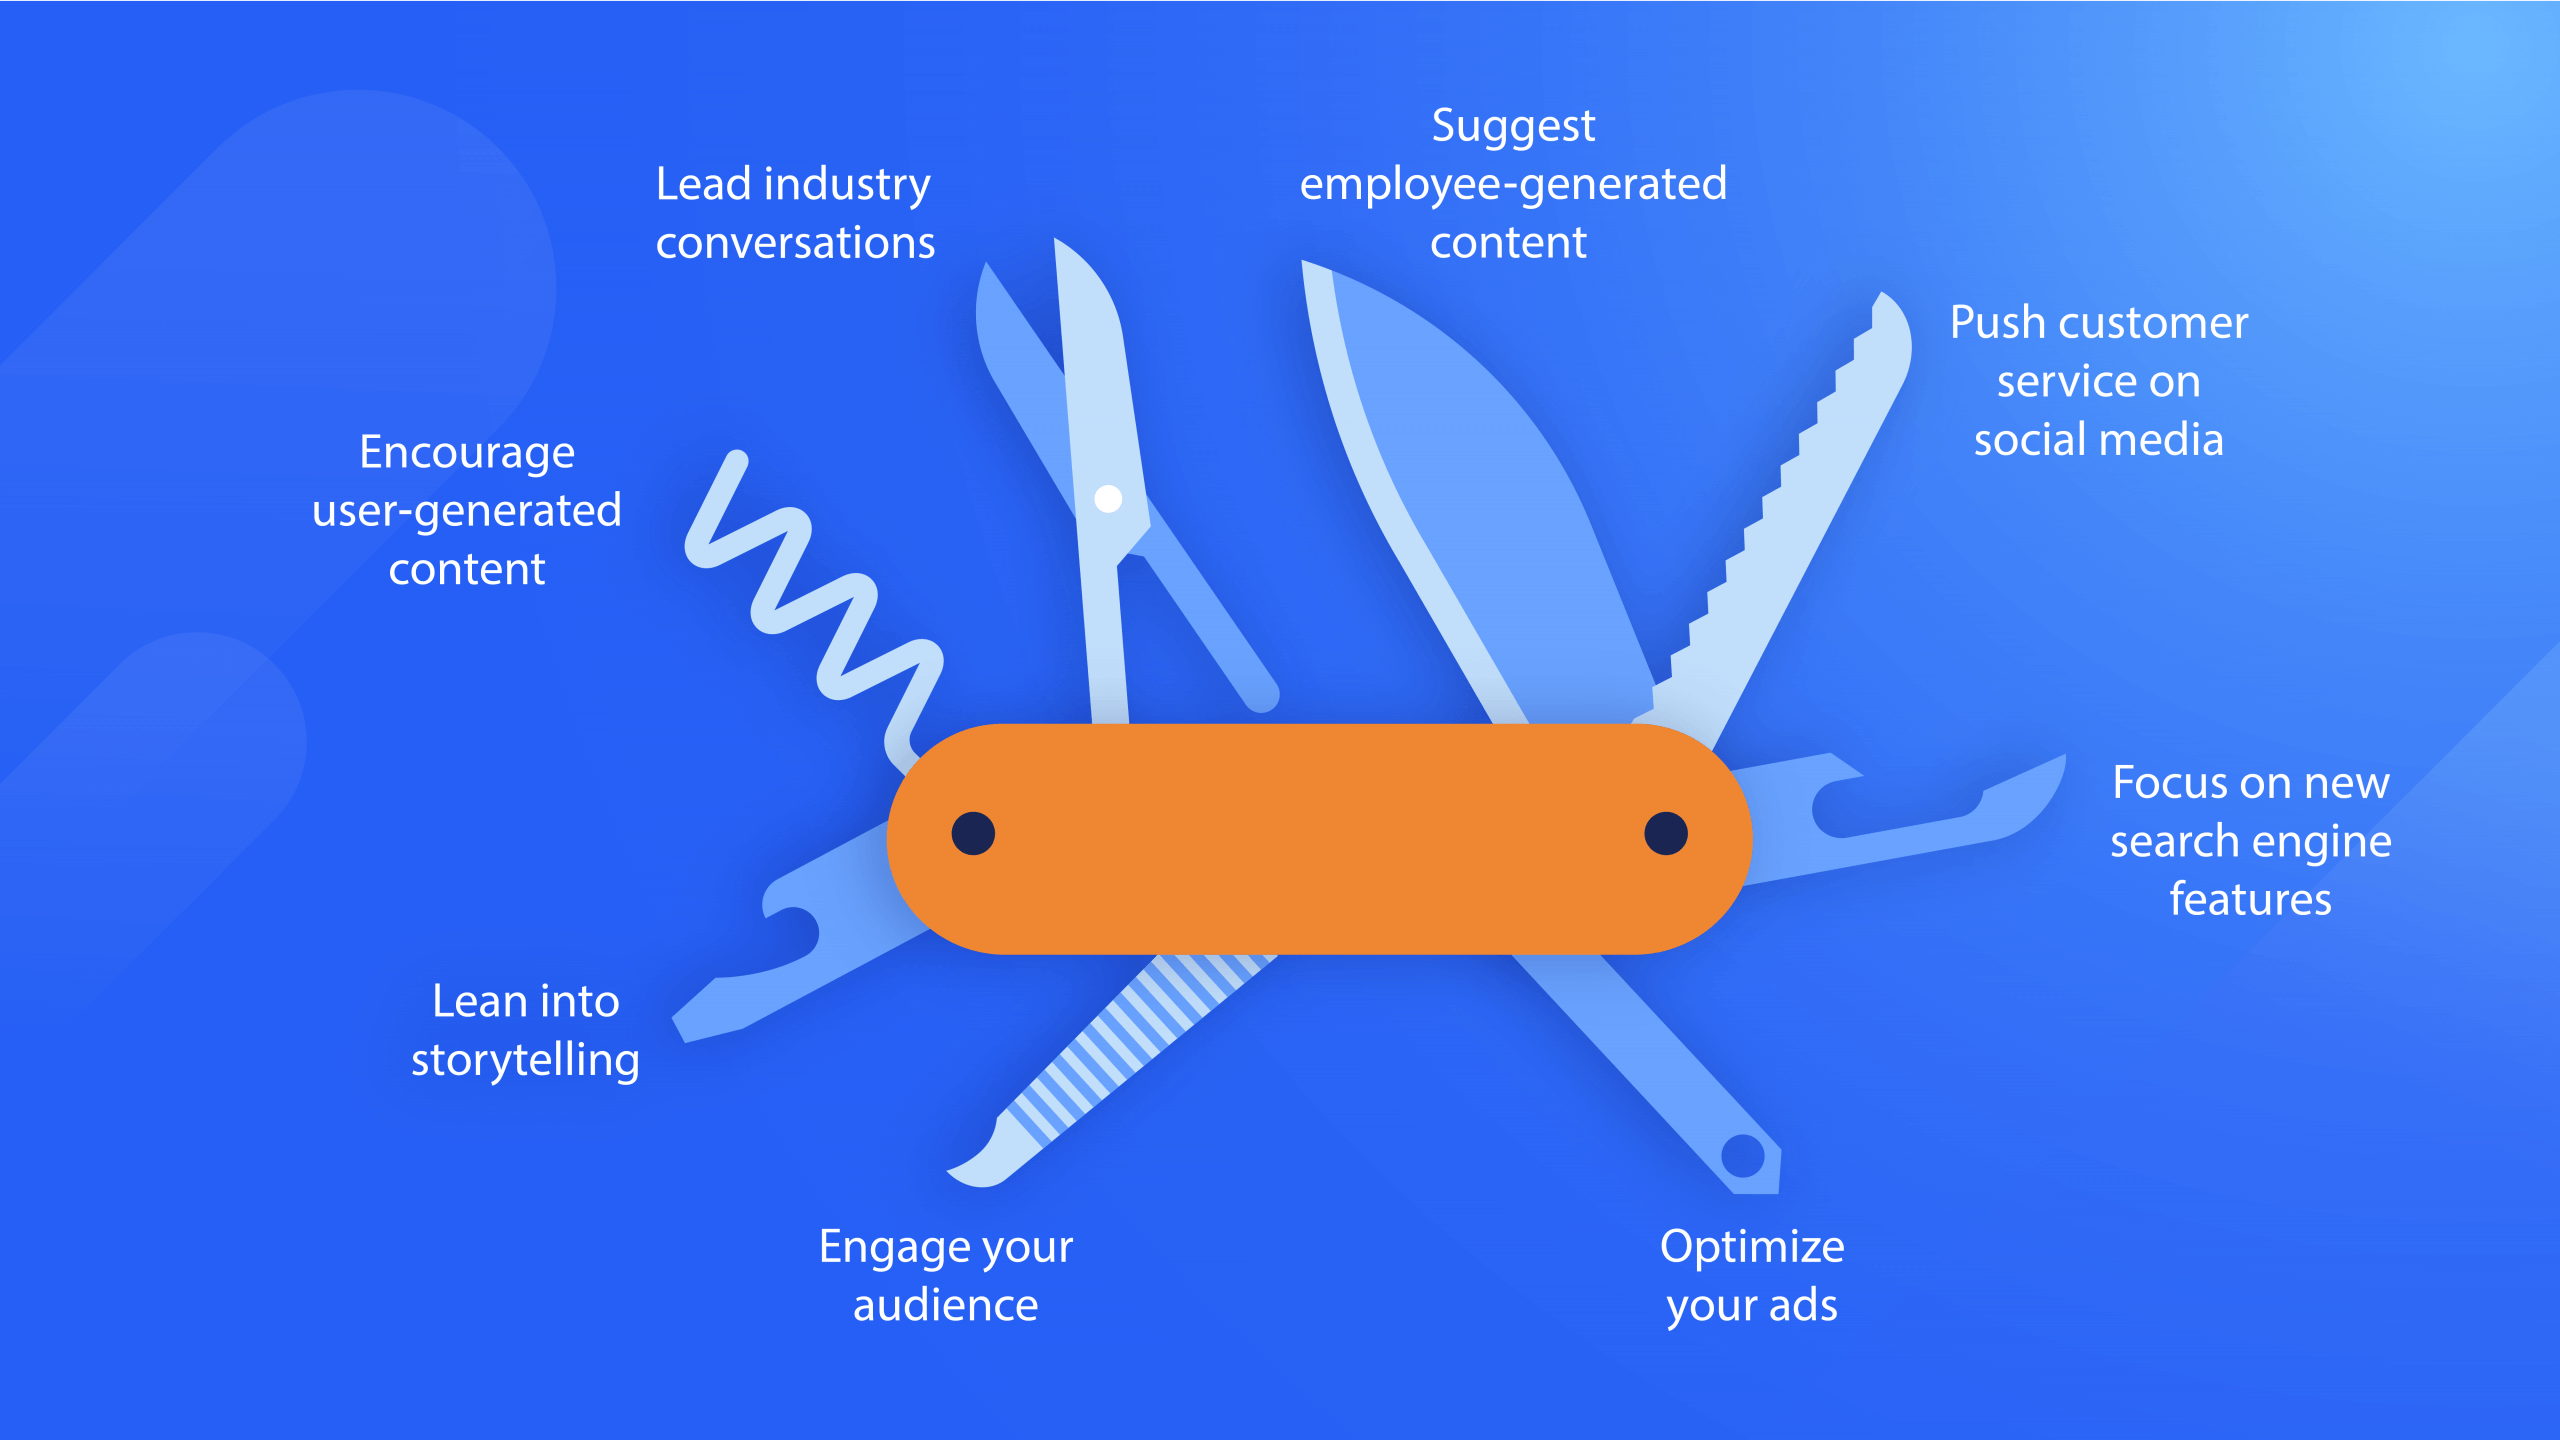 Swiss army knife with the share of voice benefits listed